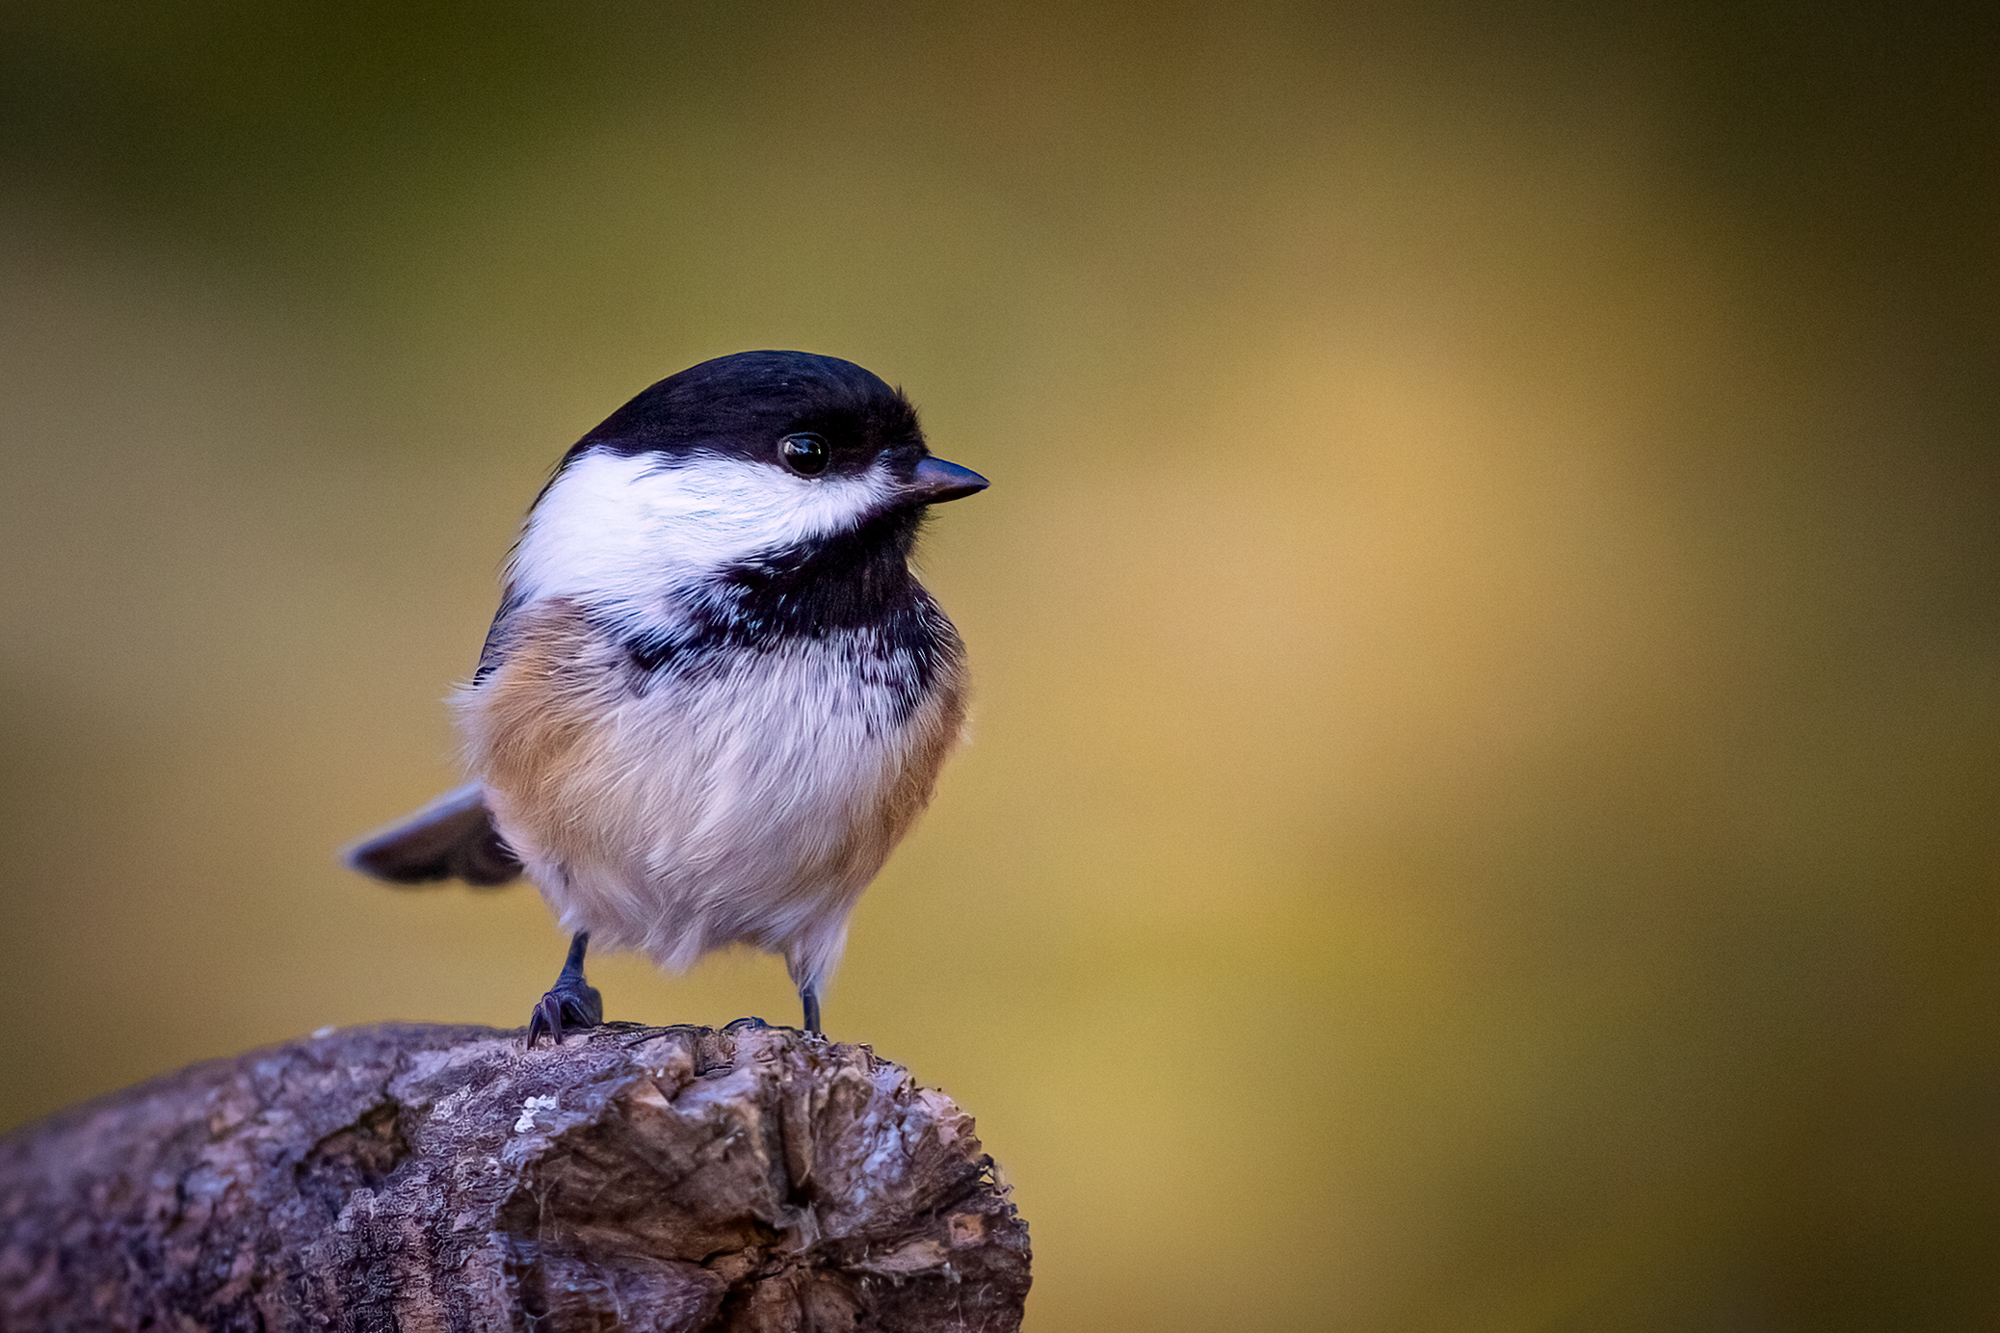 Photo of a Black-capped chickadee sitting on top of a broken tree branch. The background is creamy yellow and green with no details visible.